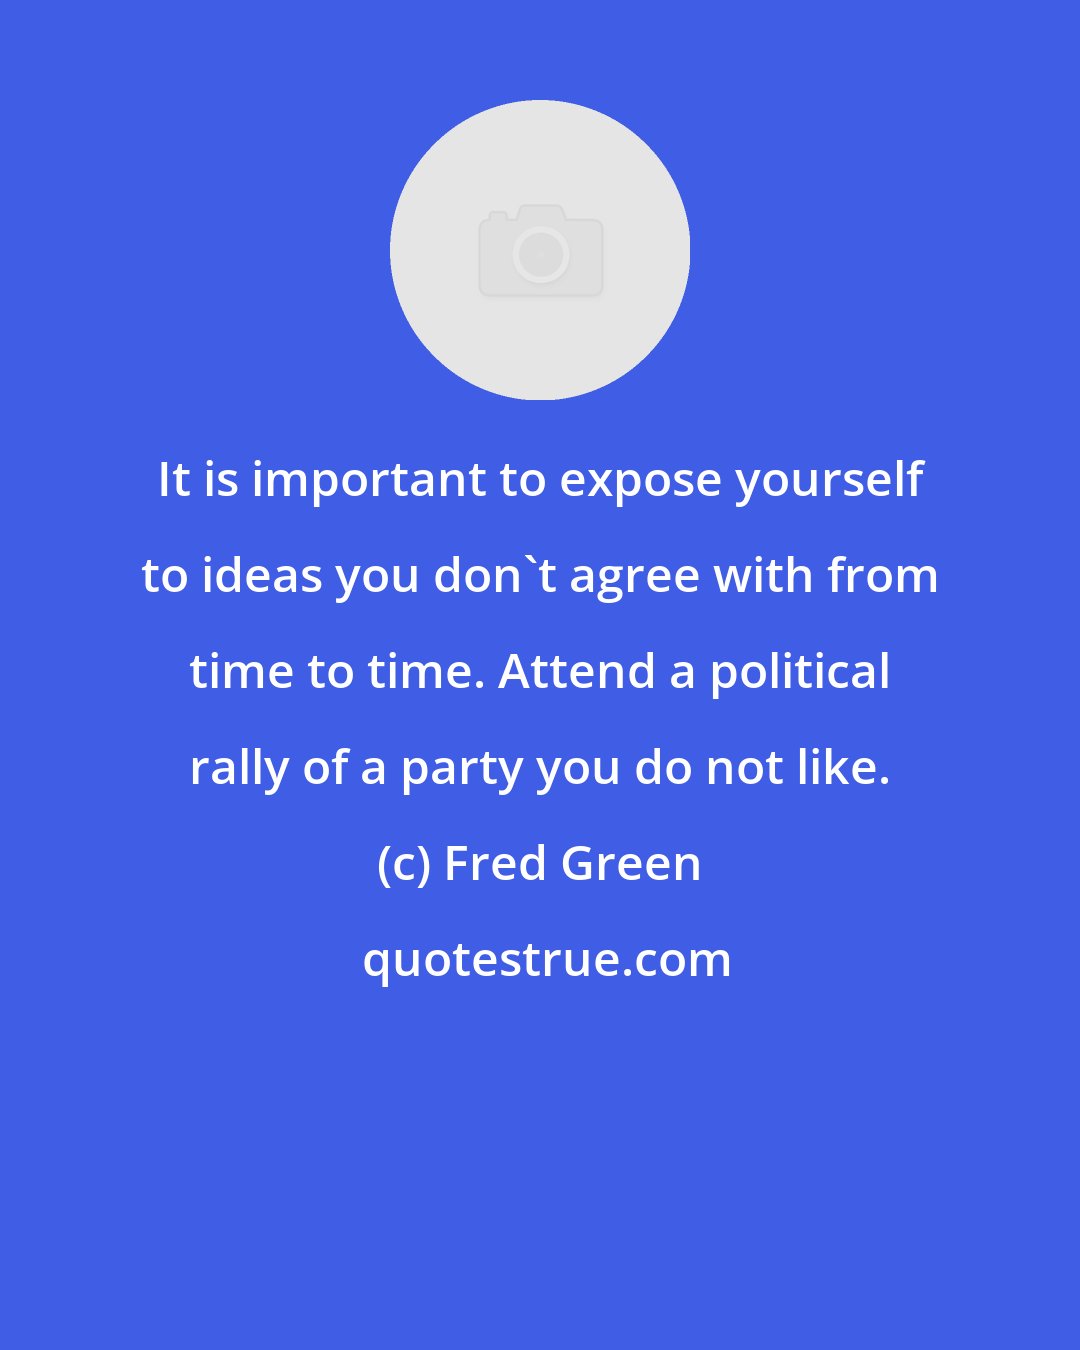 Fred Green: It is important to expose yourself to ideas you don't agree with from time to time. Attend a political rally of a party you do not like.